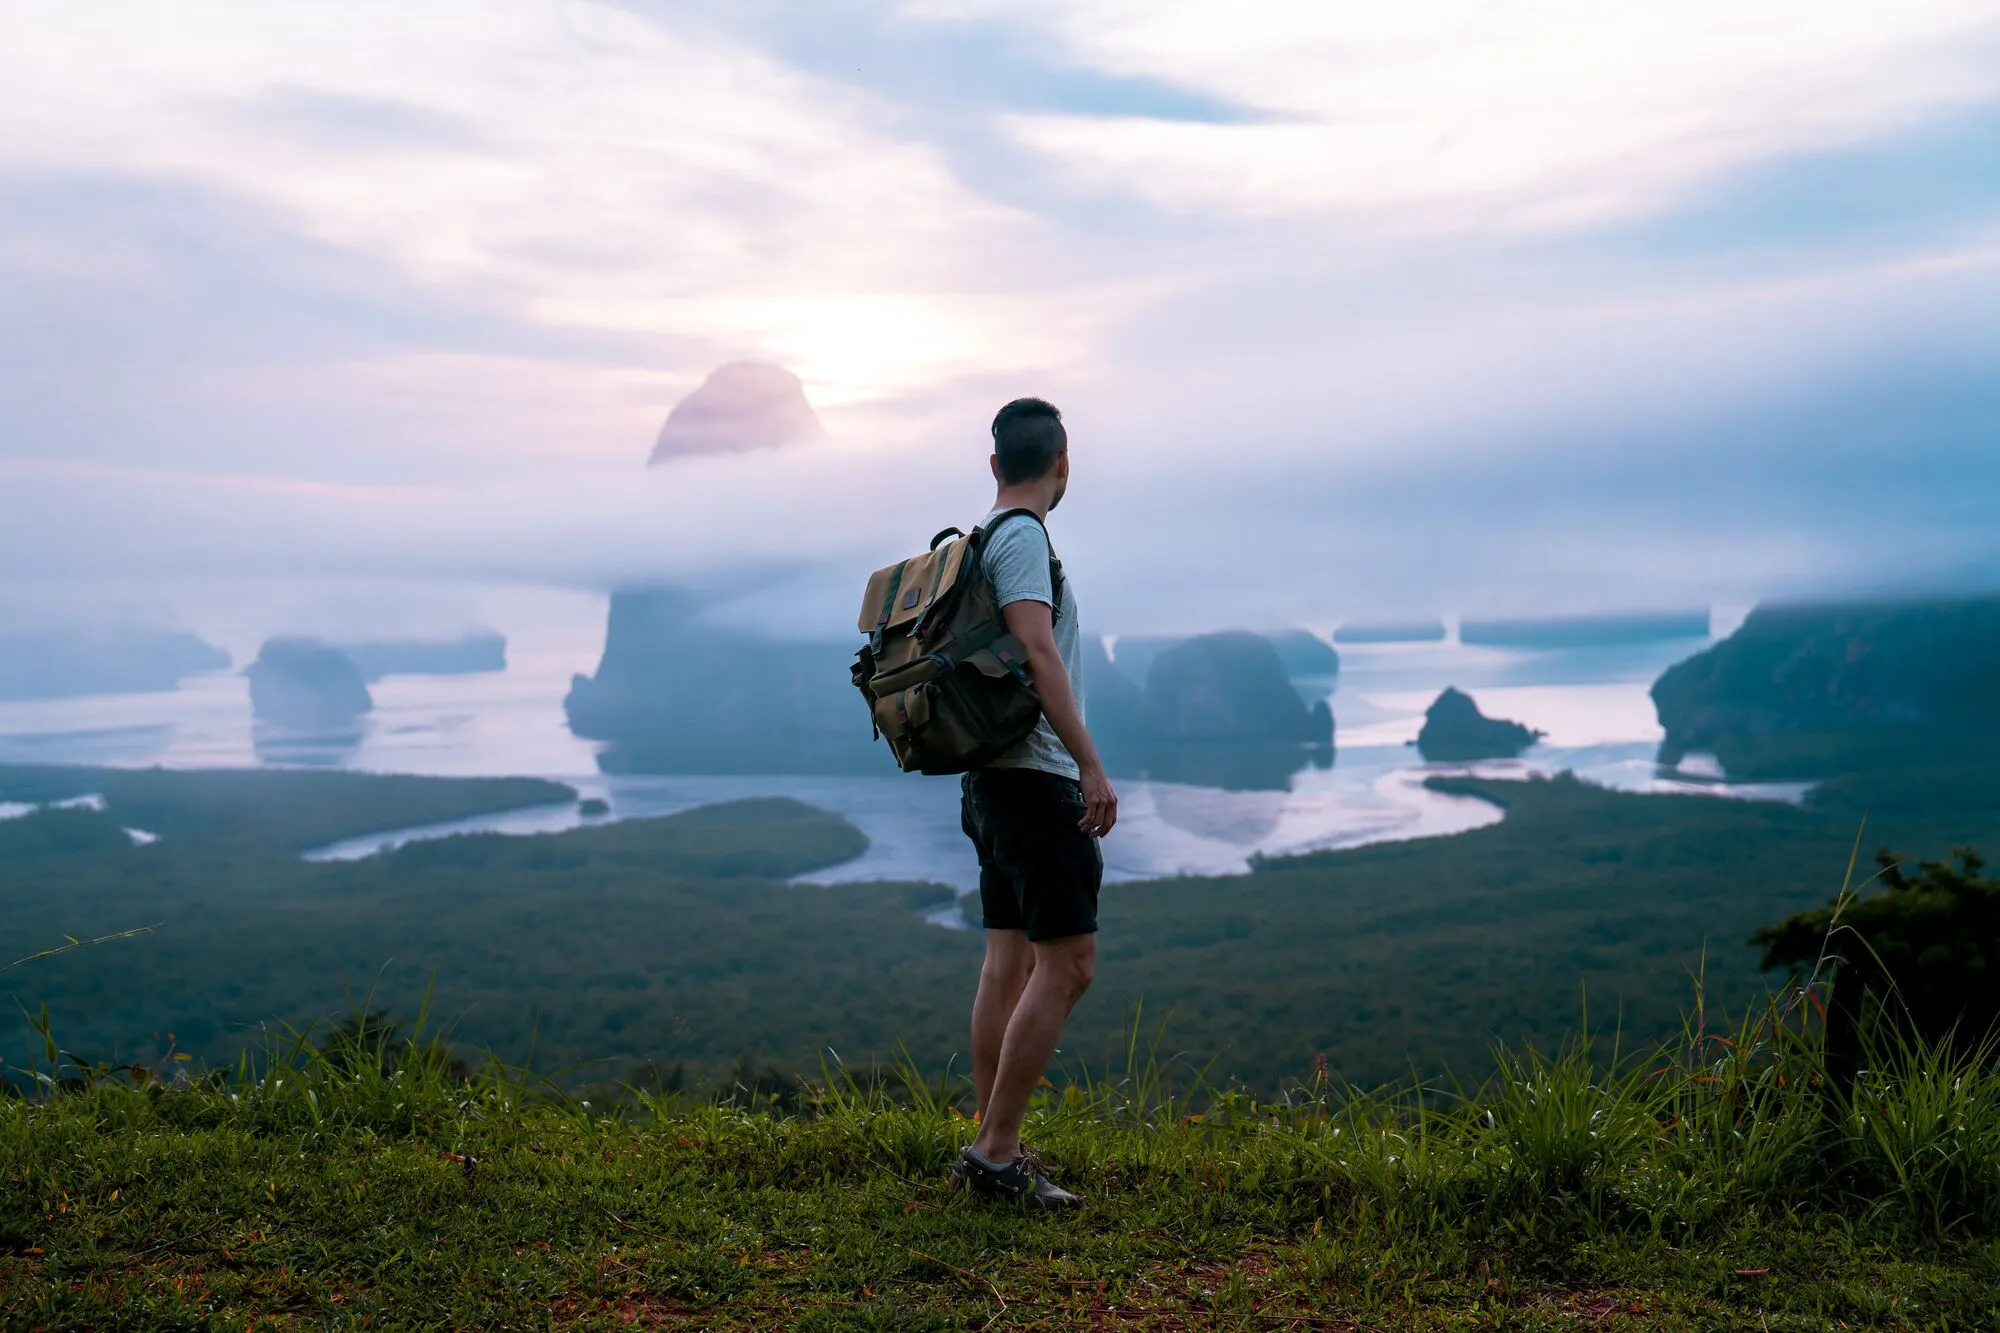 10 Amazing Things to Do in Phang Nga for Solo Travelers - A Complete Guide to Backpacking Phang Nga